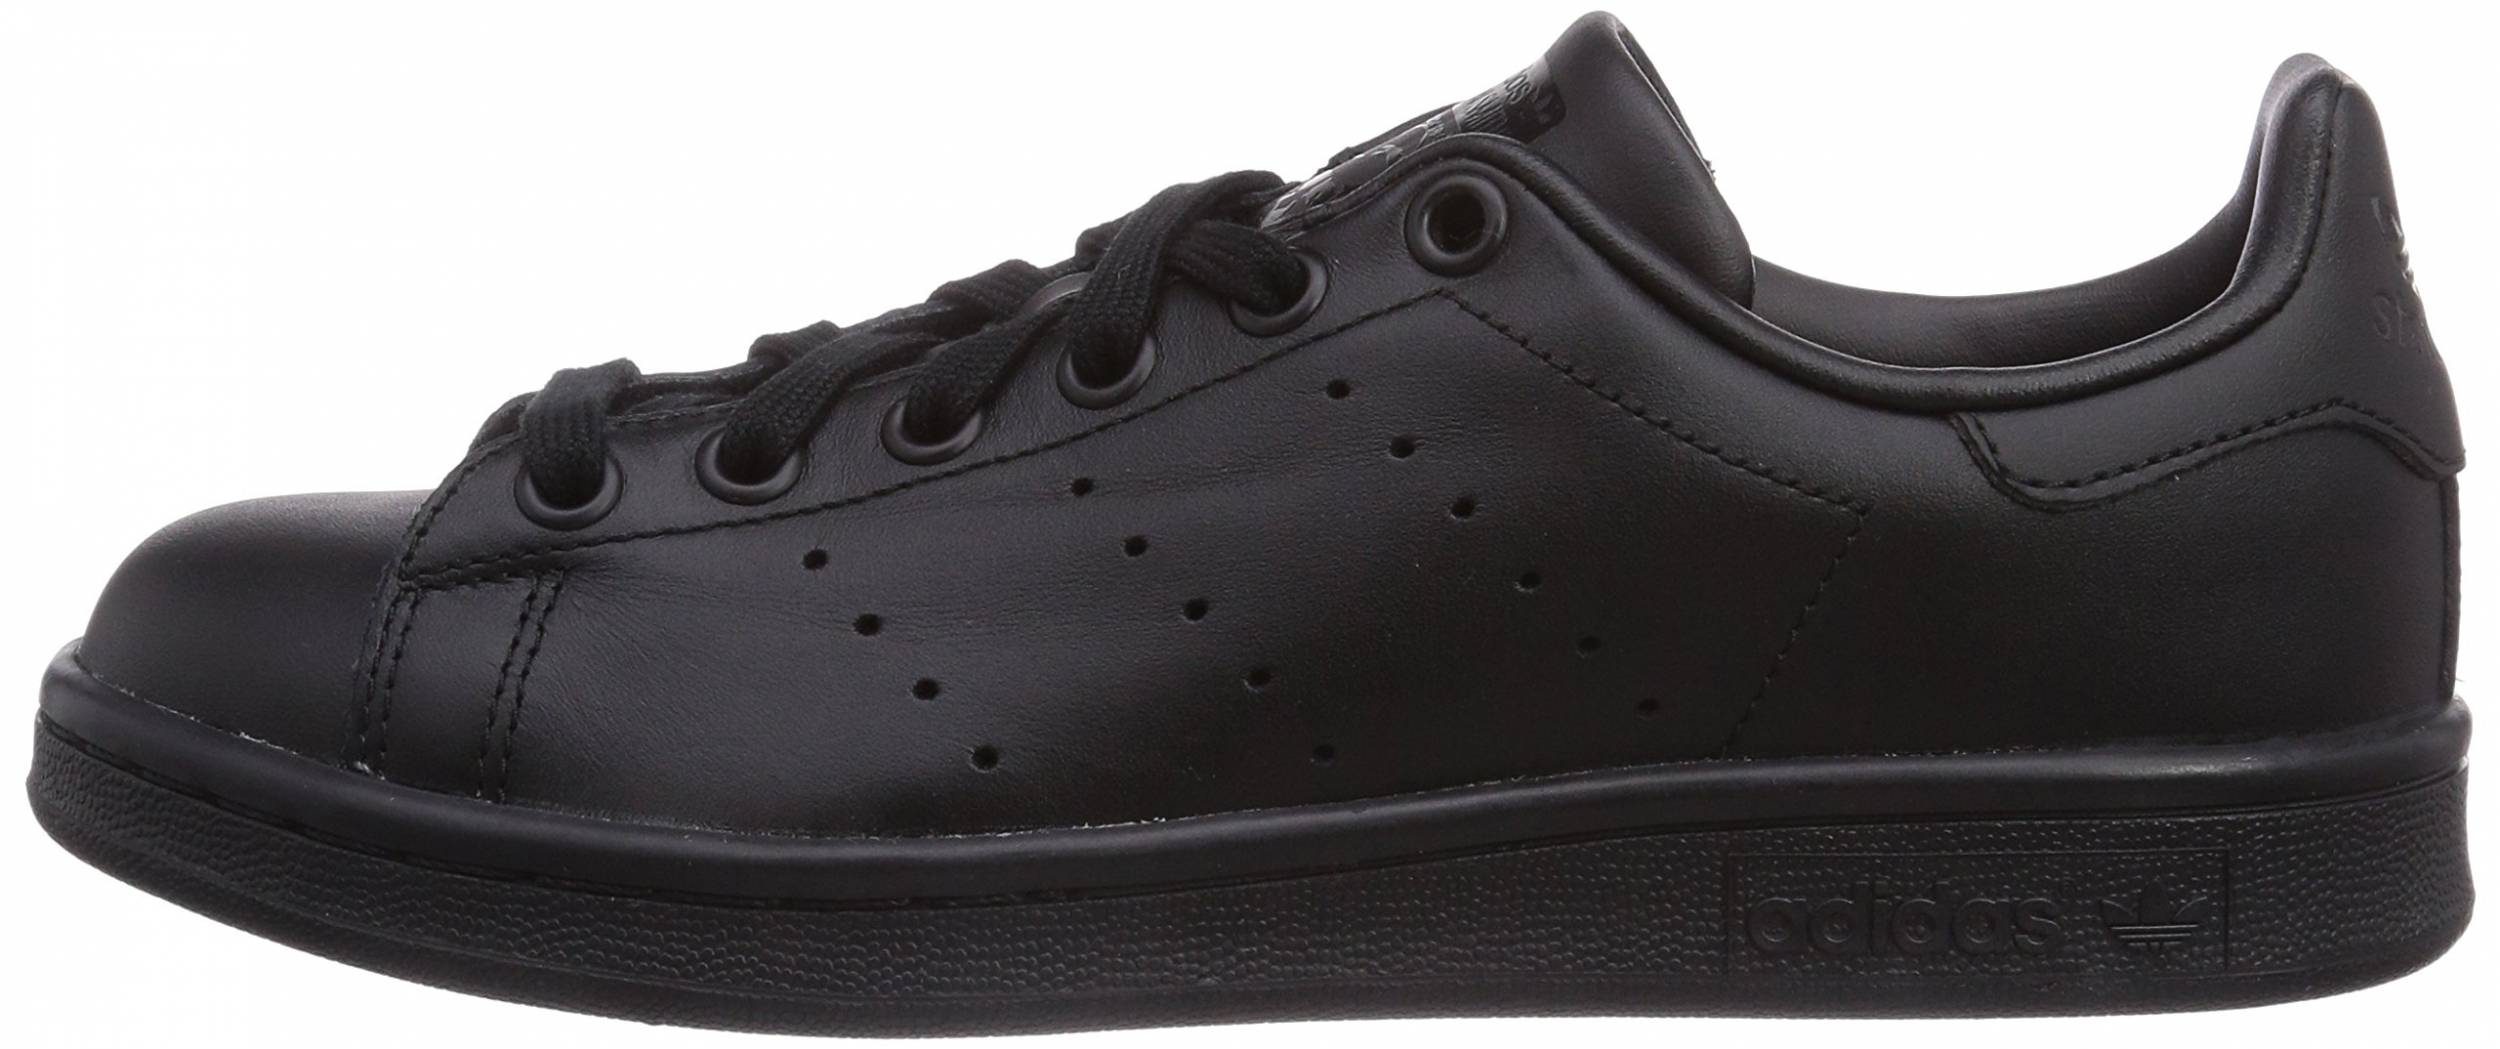 all black leather stan smiths